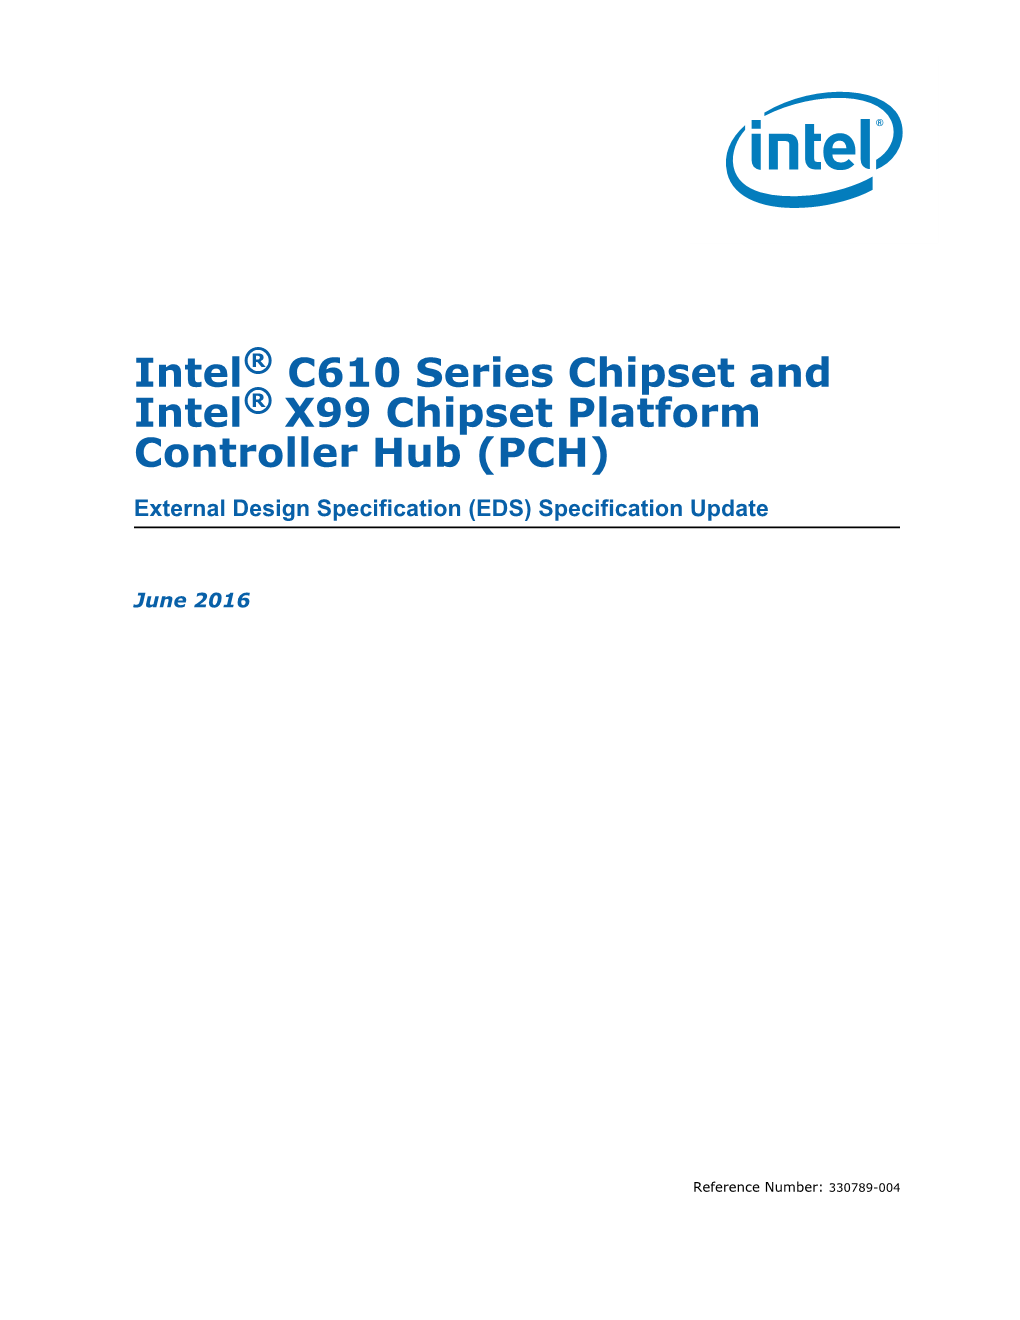 C610 Series Chipset and Intel® X99 Chipset Platform Controller Hub (PCH) External Design Specification (EDS) Specification Update